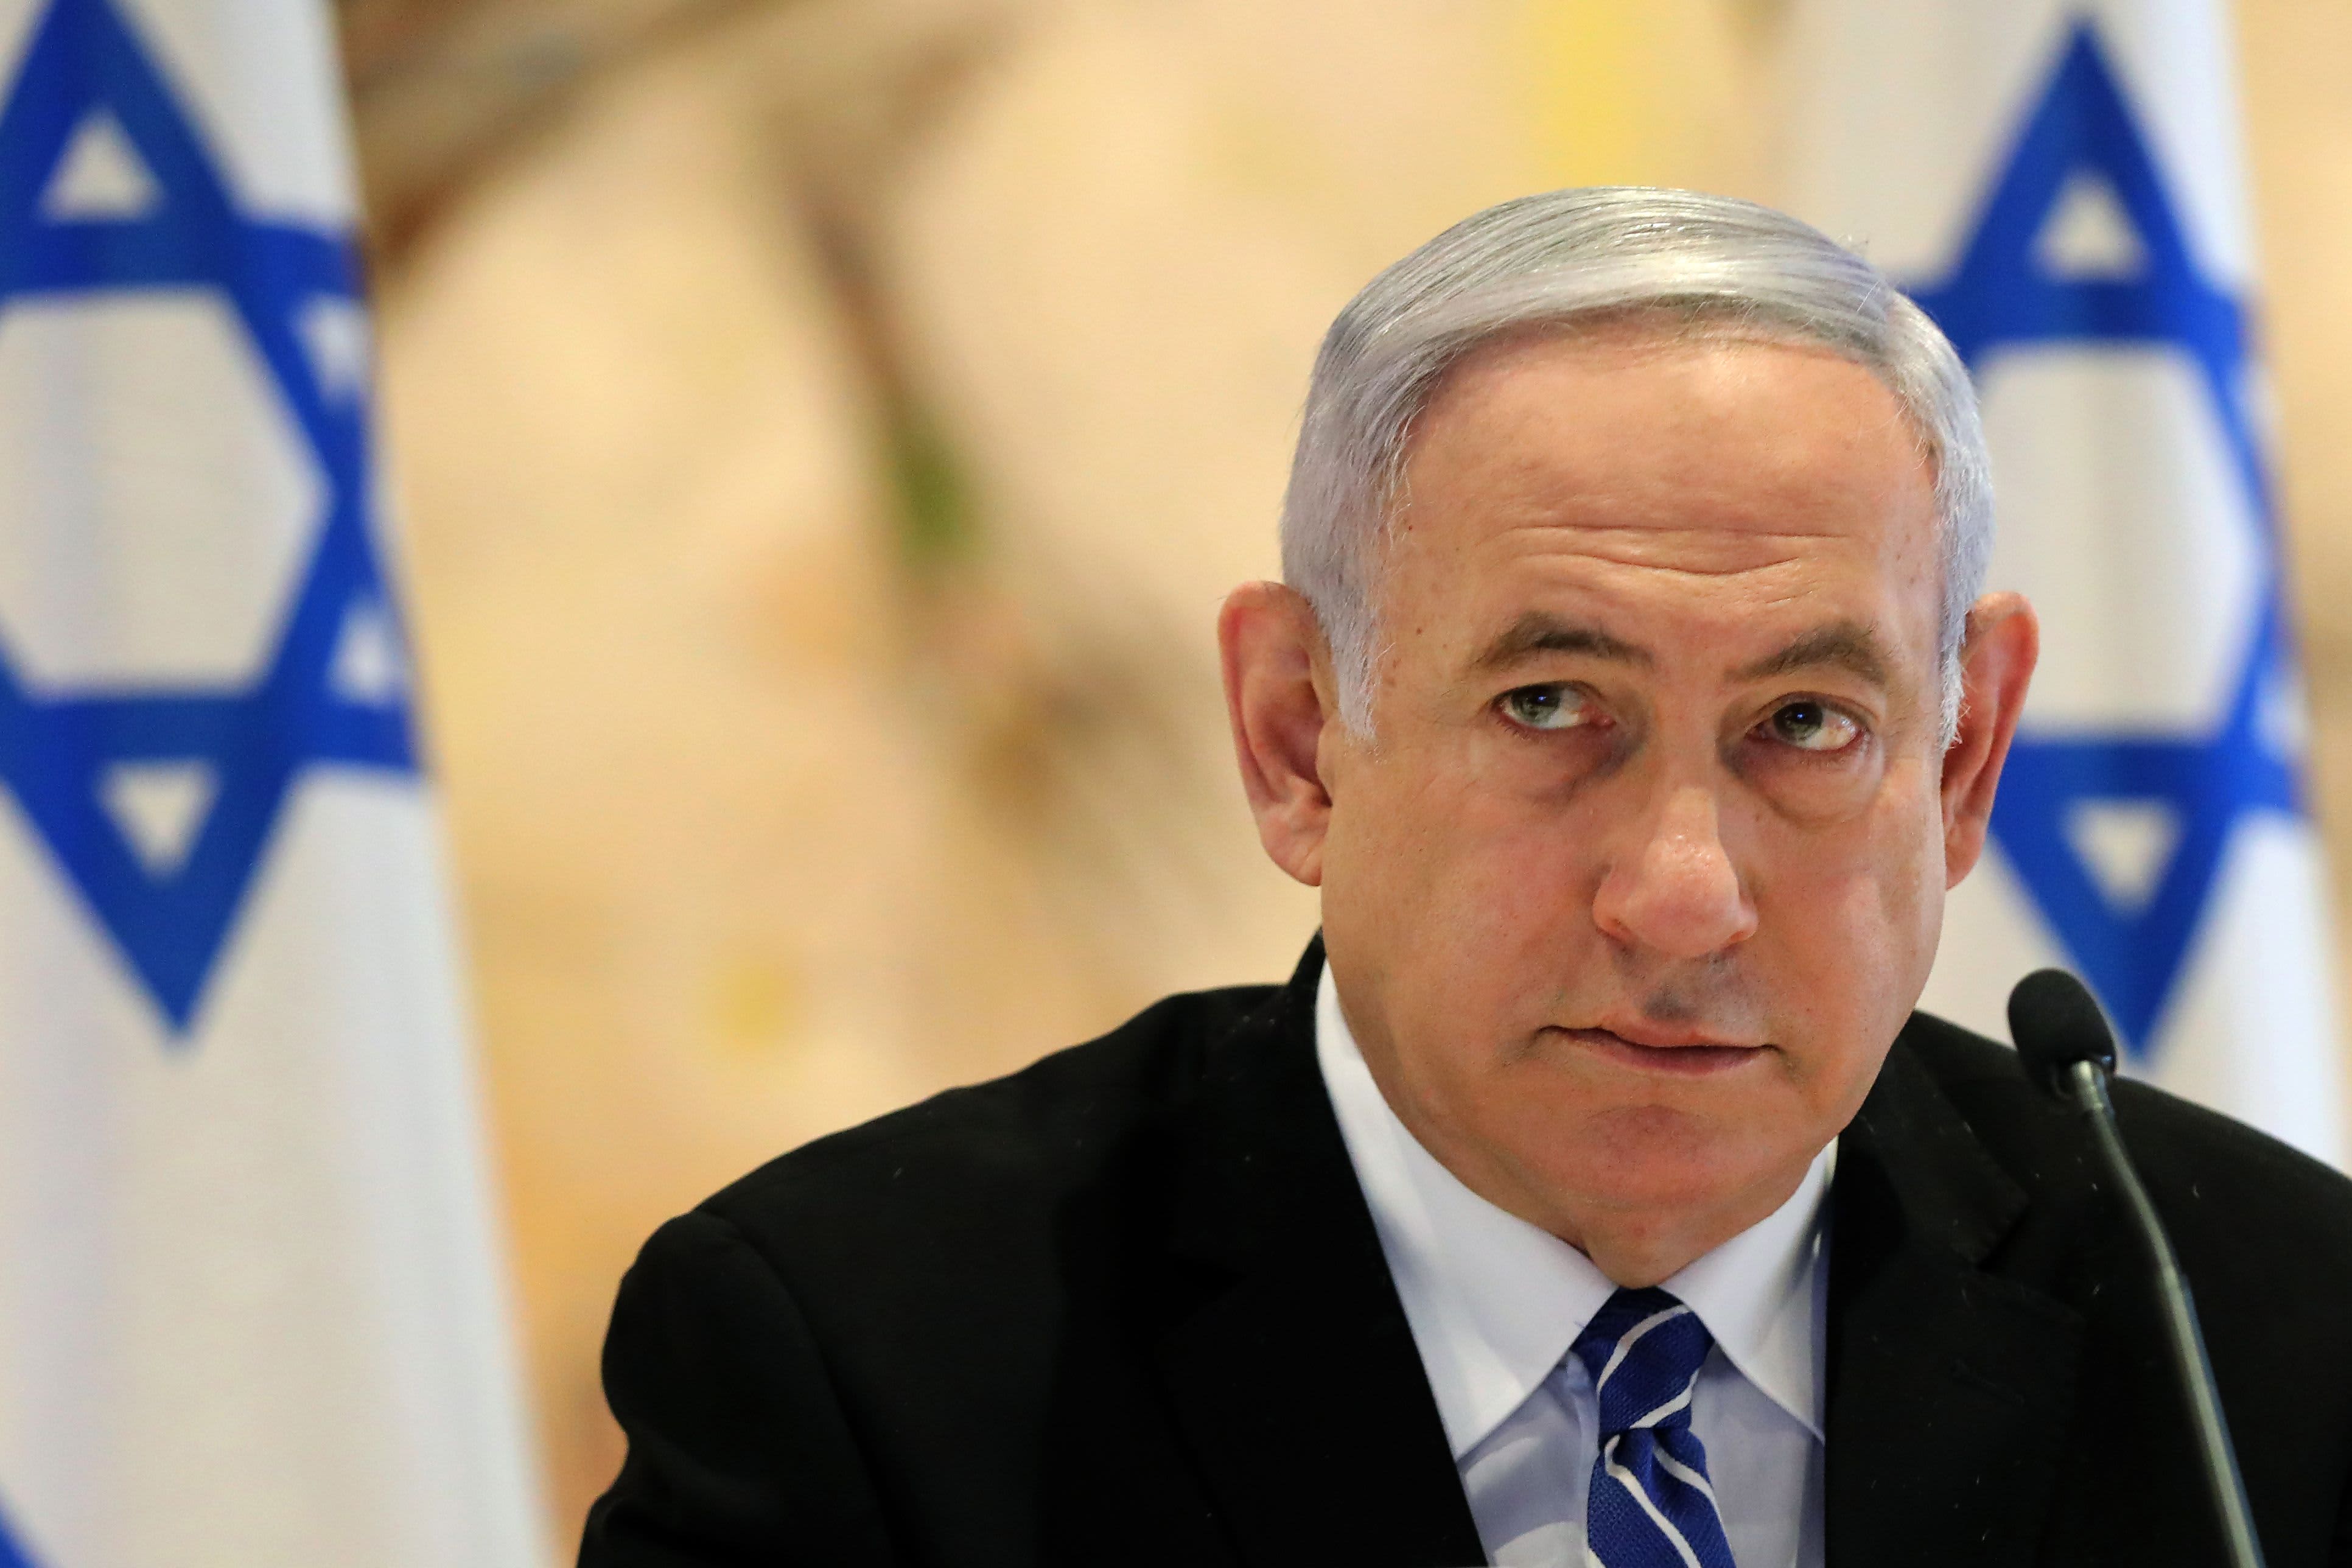 Israel to vote in new government amid parliament chaos, ending Netanyahu’s 12-year rule